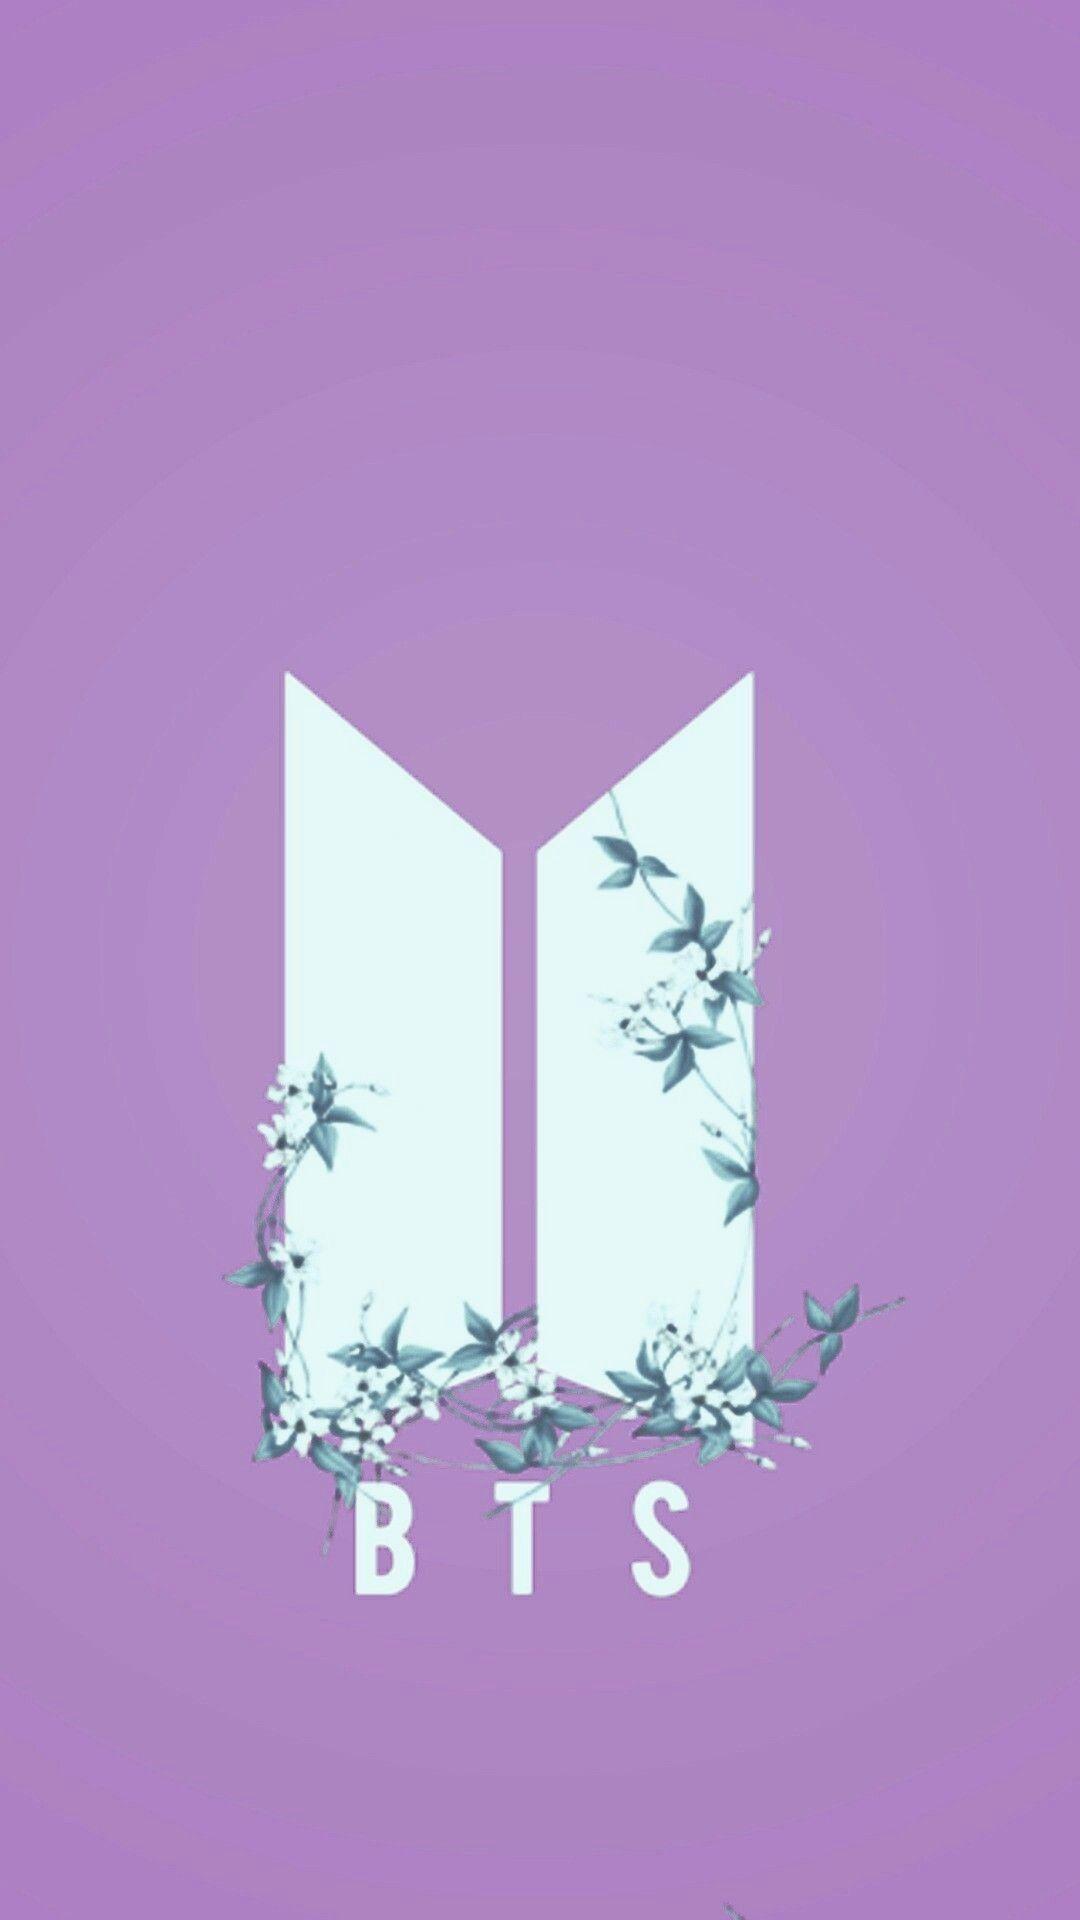 Iphone Bts Iphone Aesthetic Music Wallpaper : Bts Aesthetic Iphone Wallpapers Top Free Bts Aesthetic Iphone Backgrounds Wallpaperaccess / This is a guide on how to be all kinds of aesthetic!